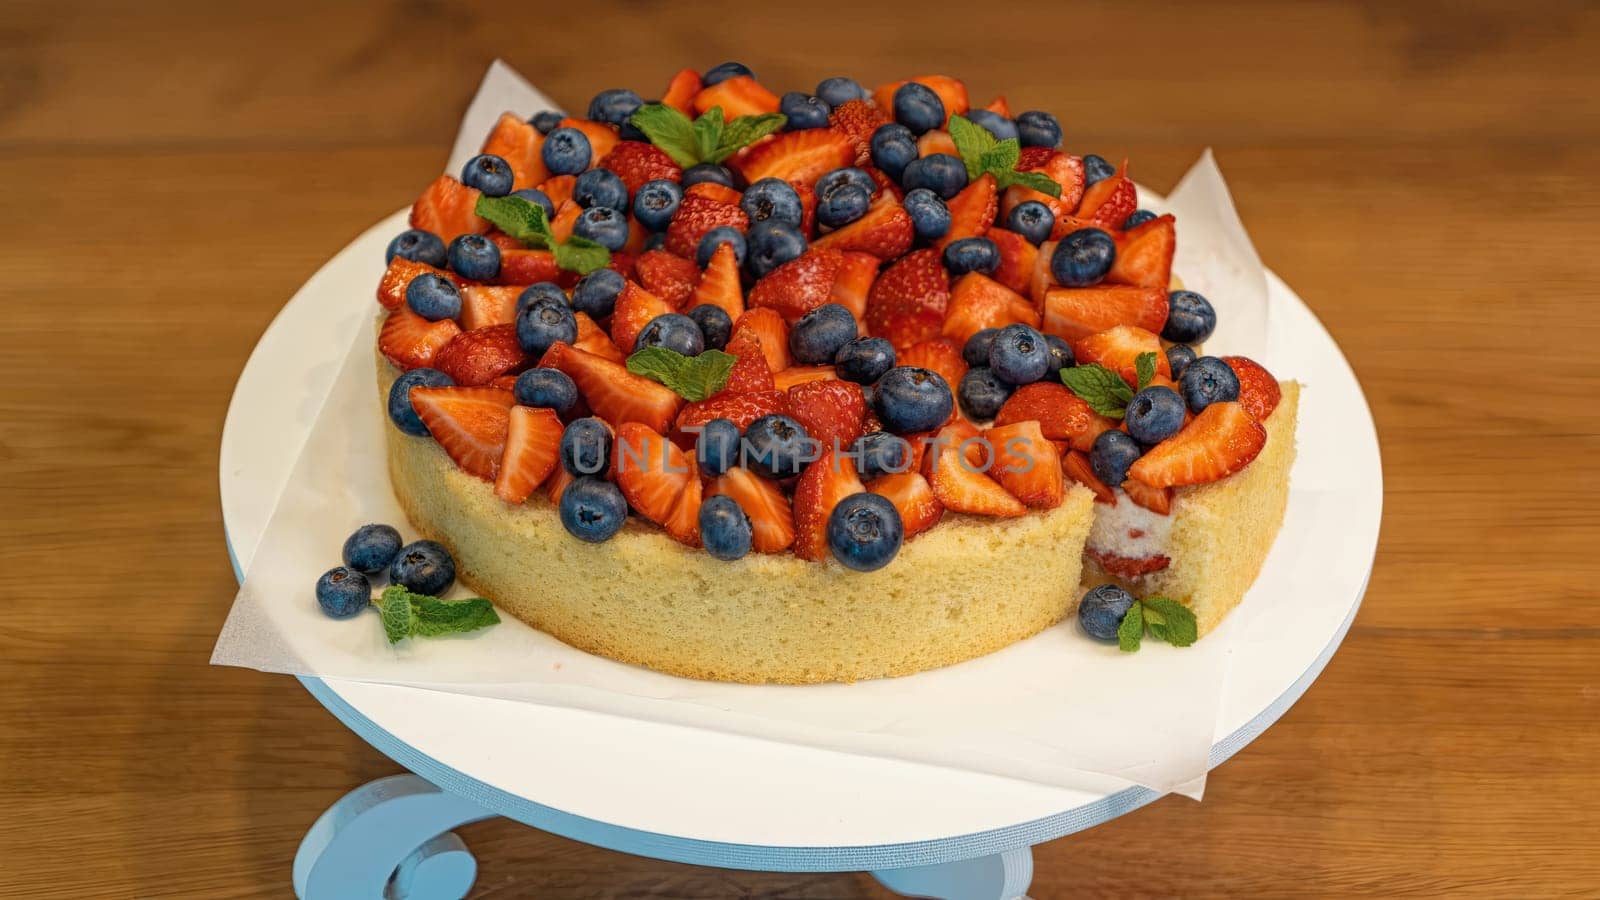 Perfect Sponge Cake with Delicious Fruits in 4k